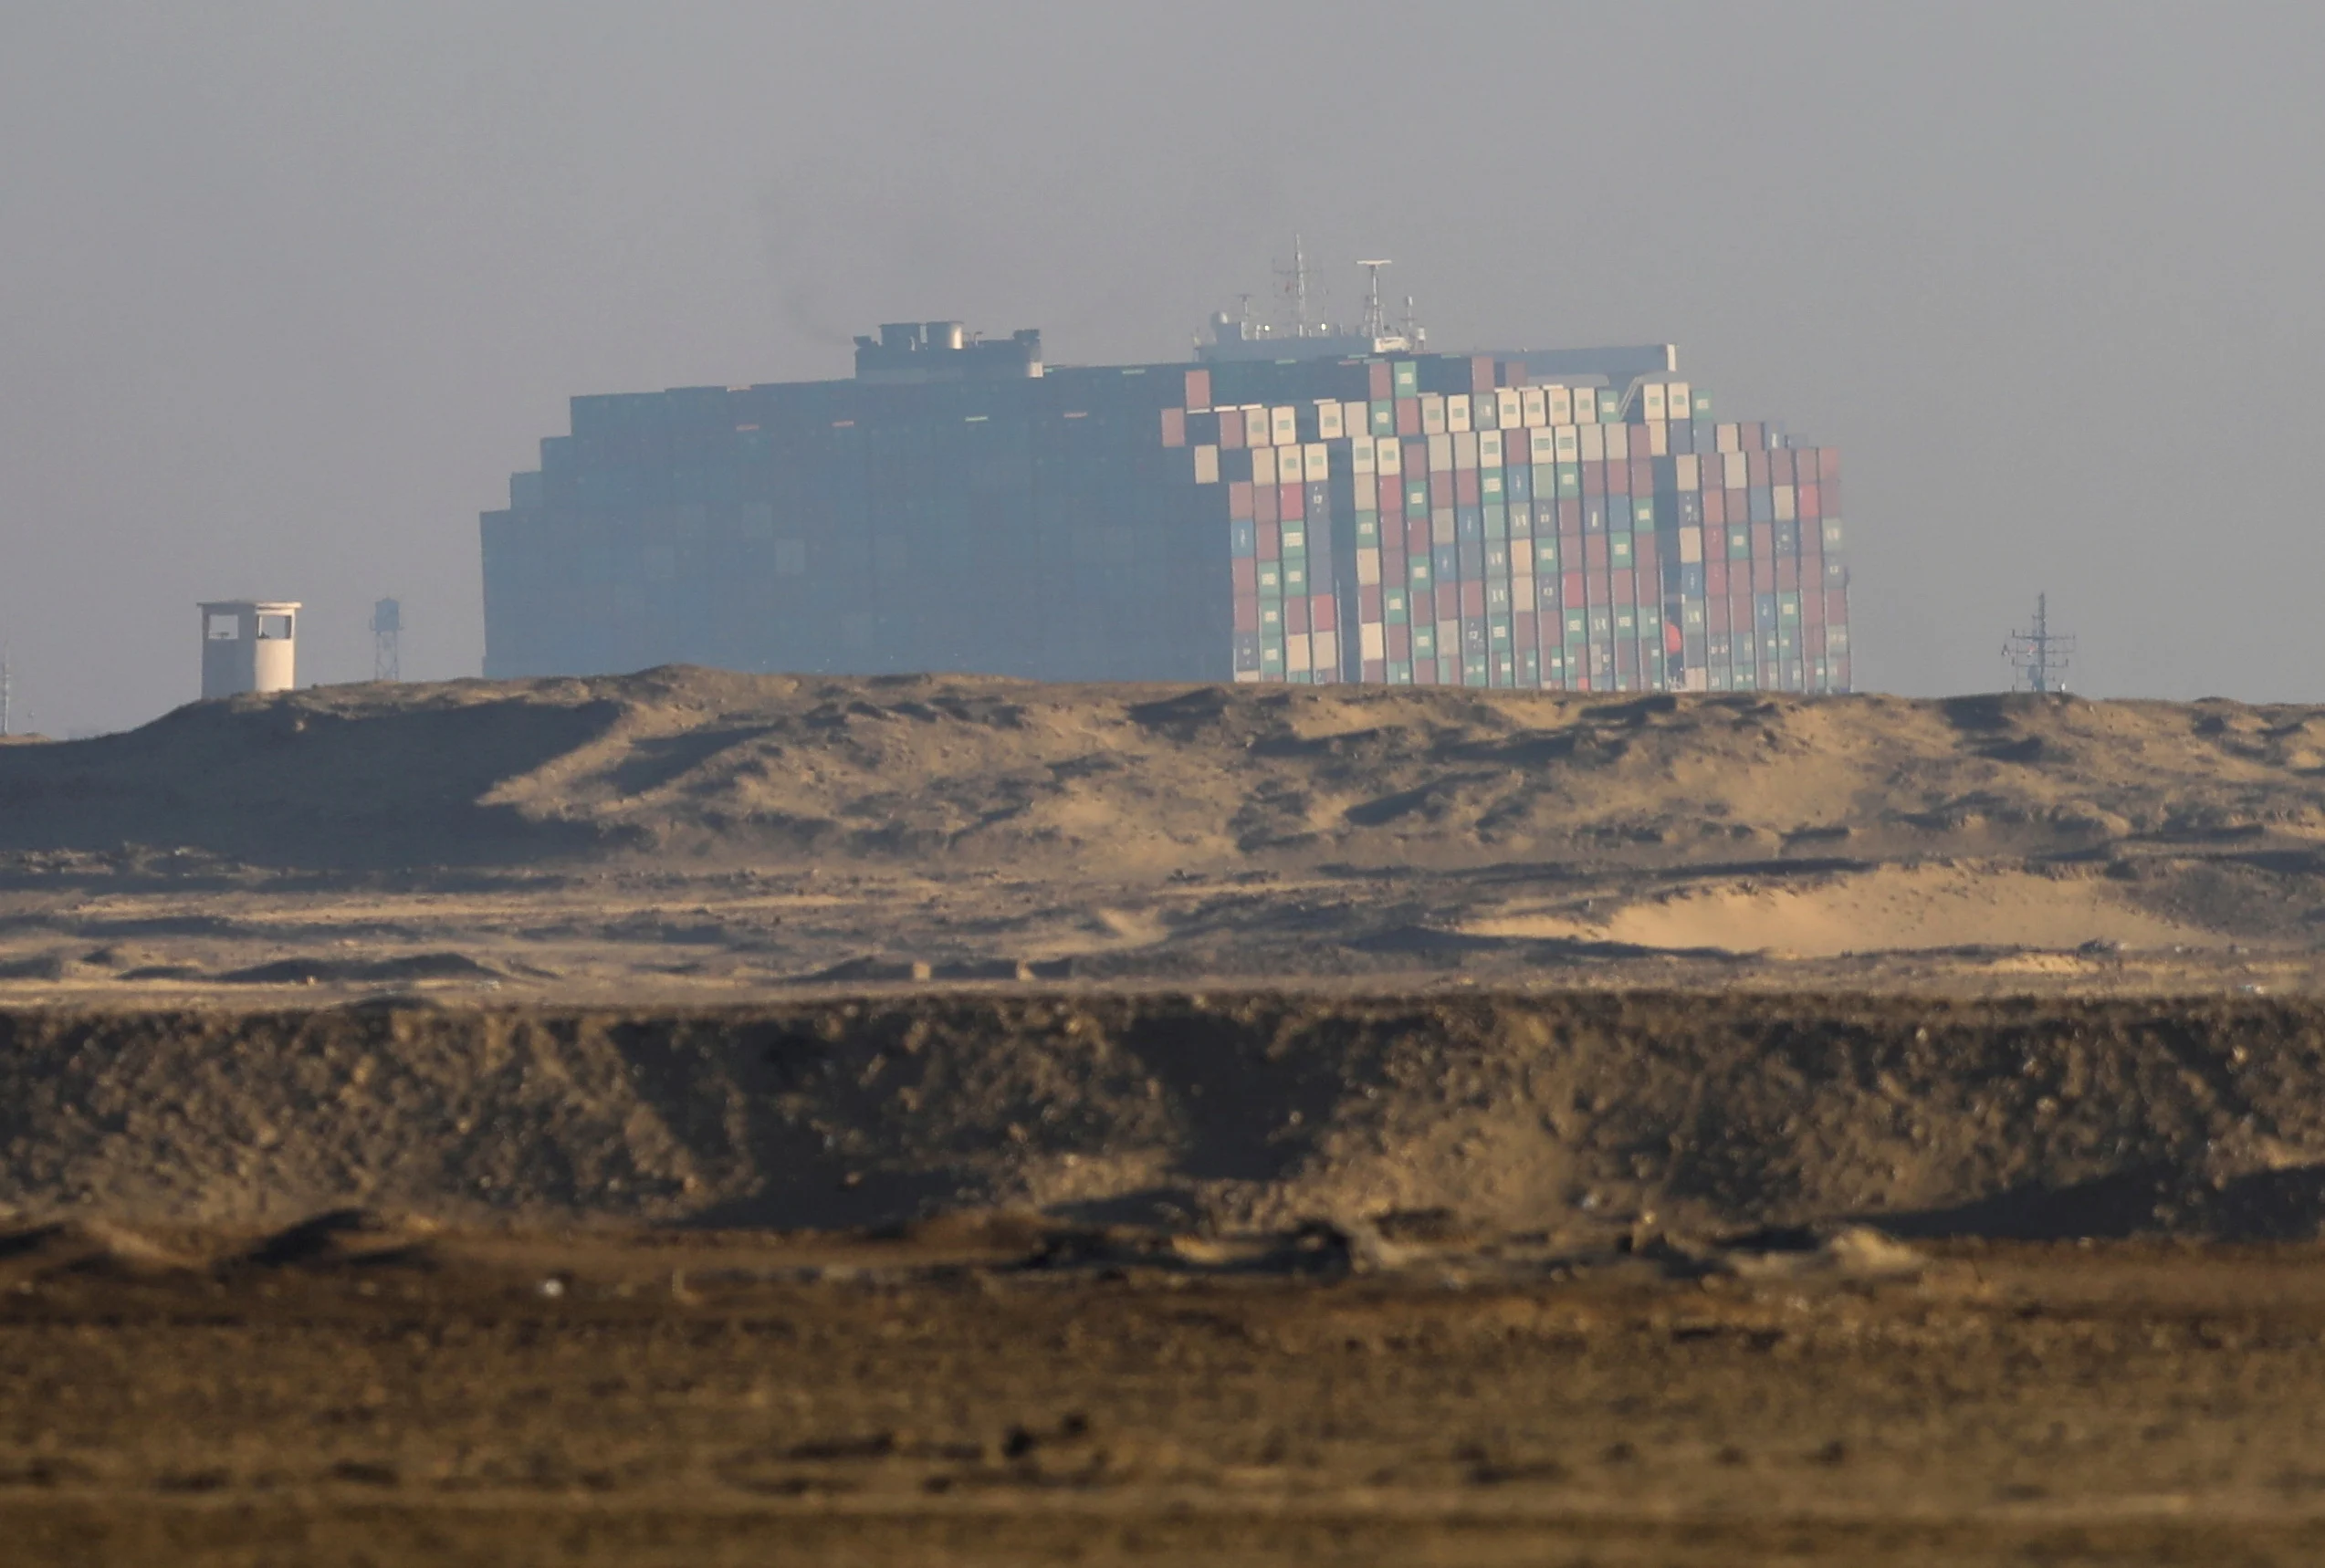 A view shows the container ship Ever Given, one of the world's largest container ships, in Suez Canal, Egypt March 29, 2021. REUTERS/Mohamed Abd El Ghany